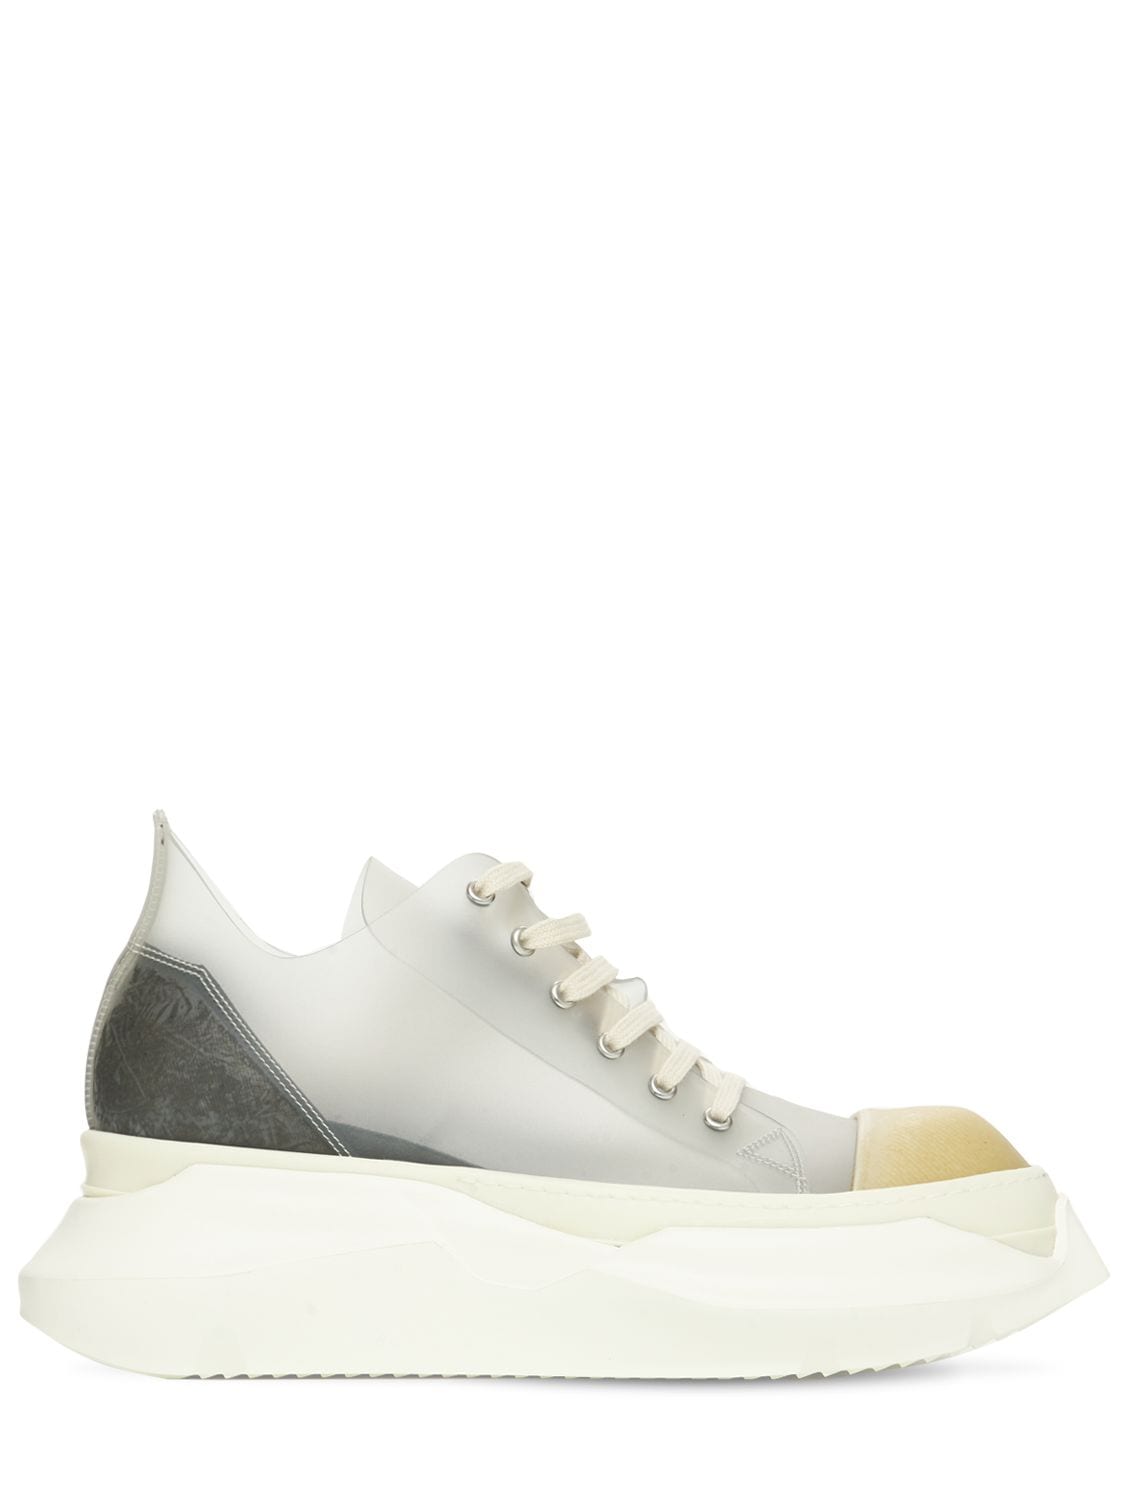 Rick Owens Recycled Tech Abstract Low Sneakers In Transparent,mlk